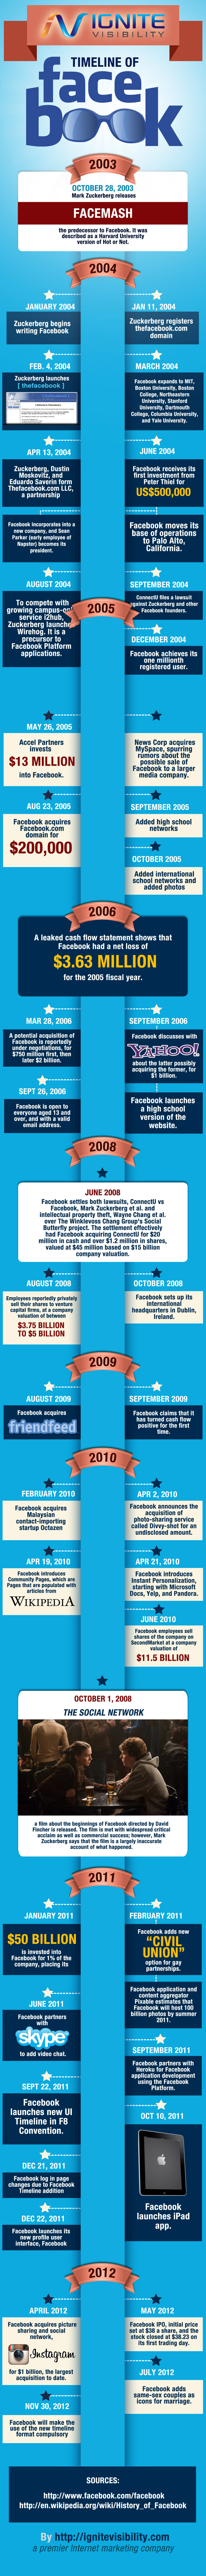 History of Facebook Infographic